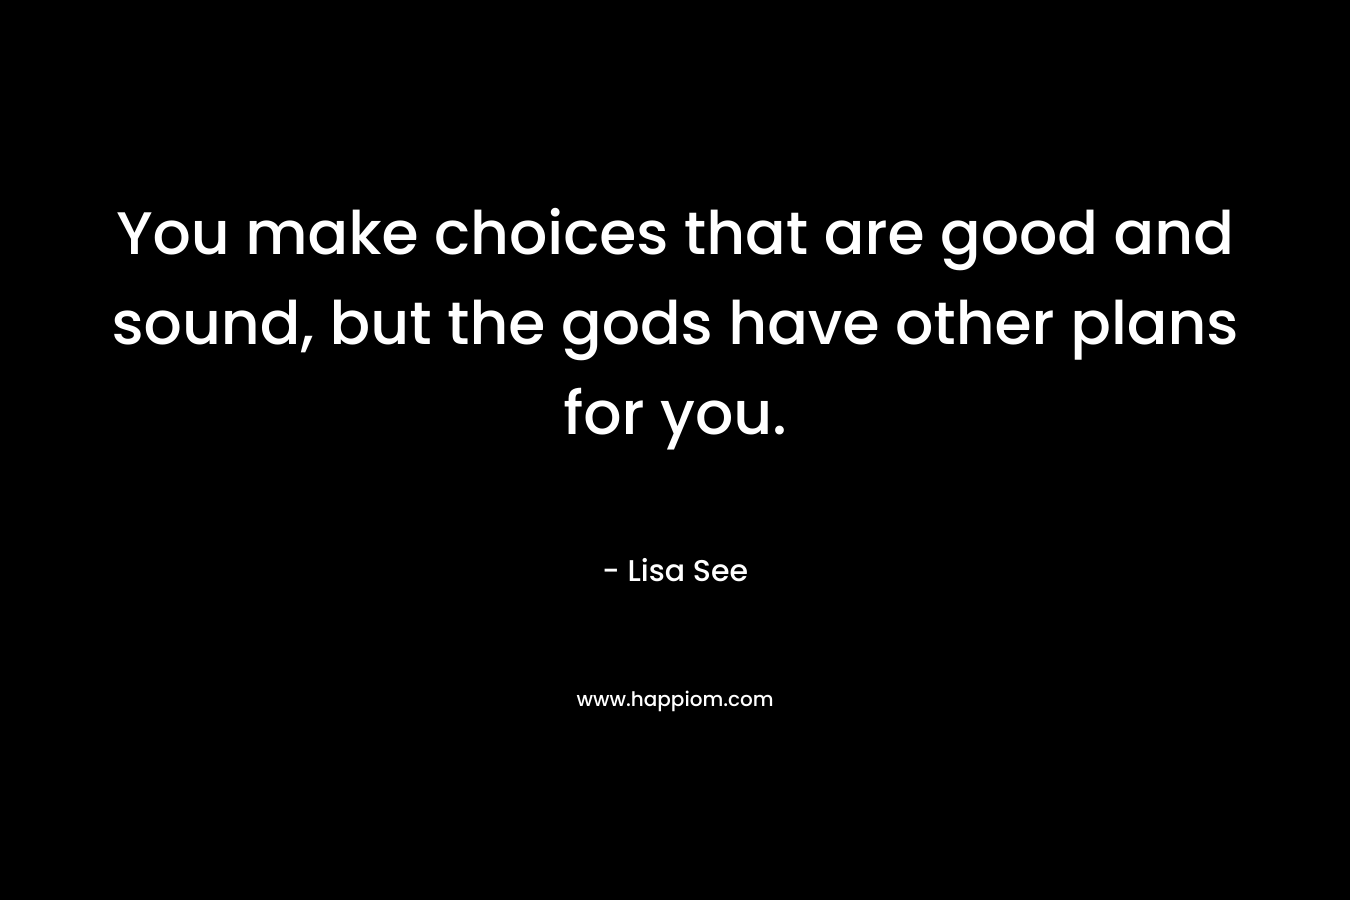 You make choices that are good and sound, but the gods have other plans for you.